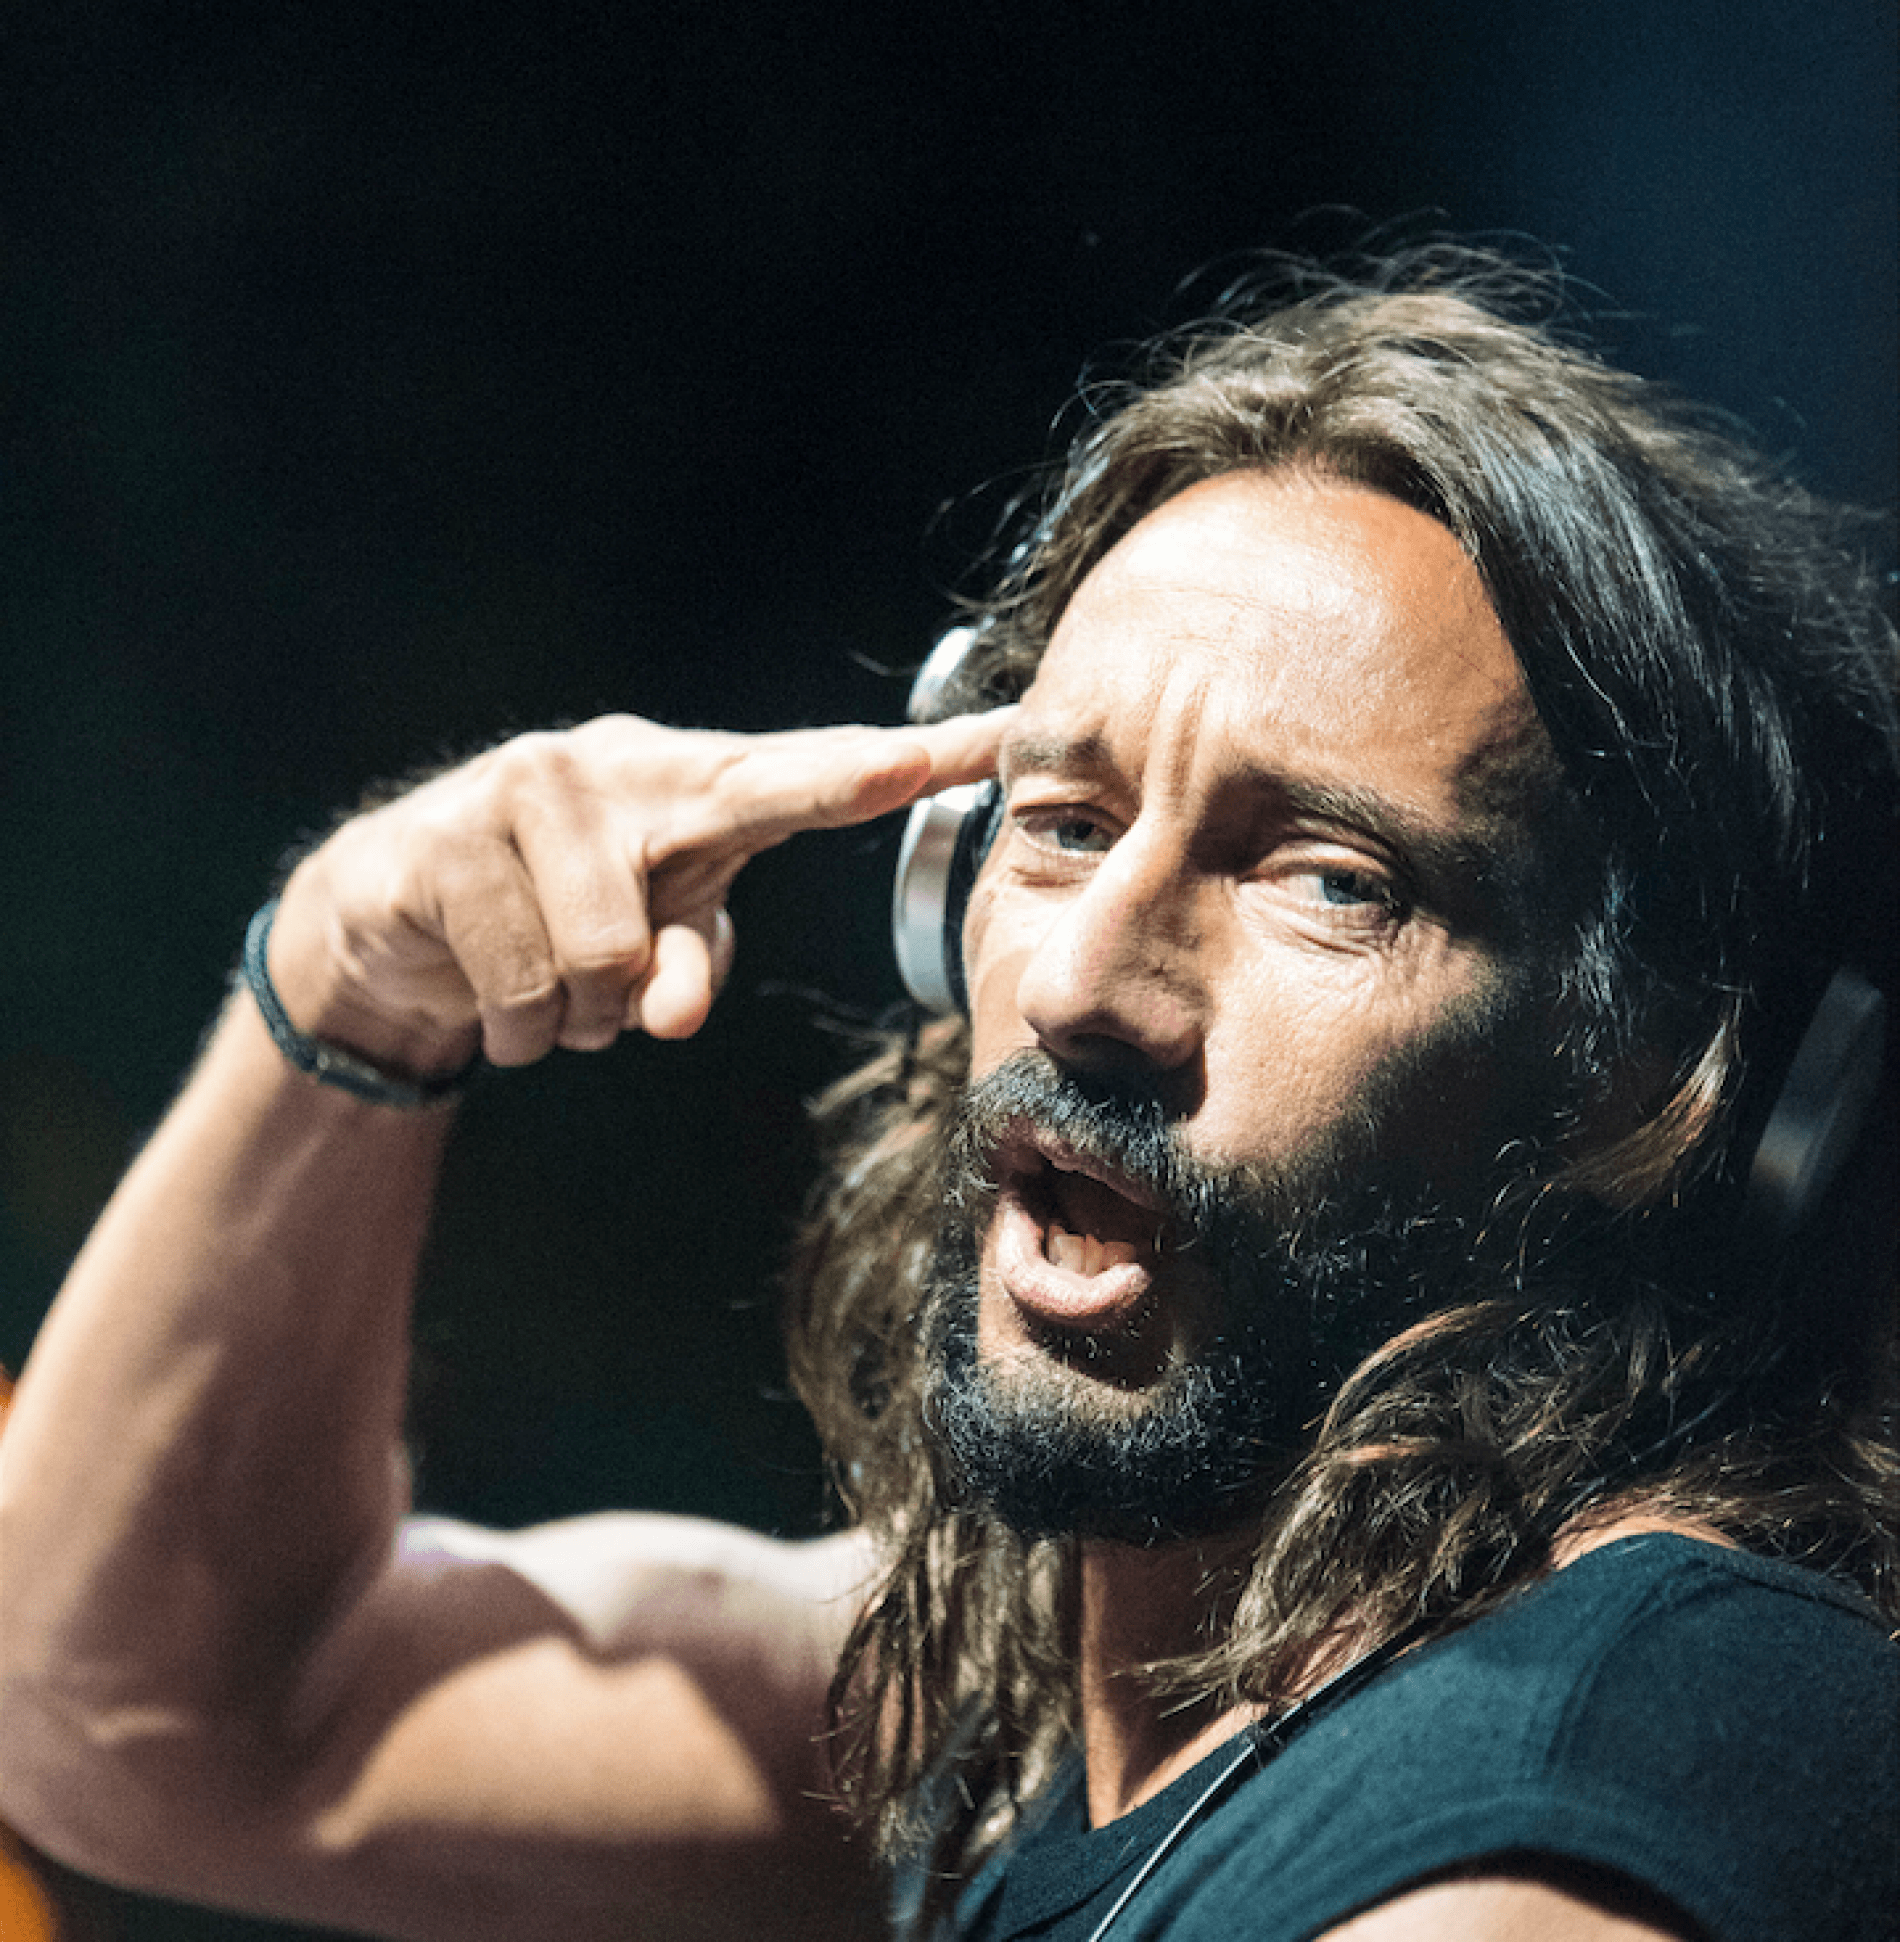 Bob Sinclar gives away stems of his hit record